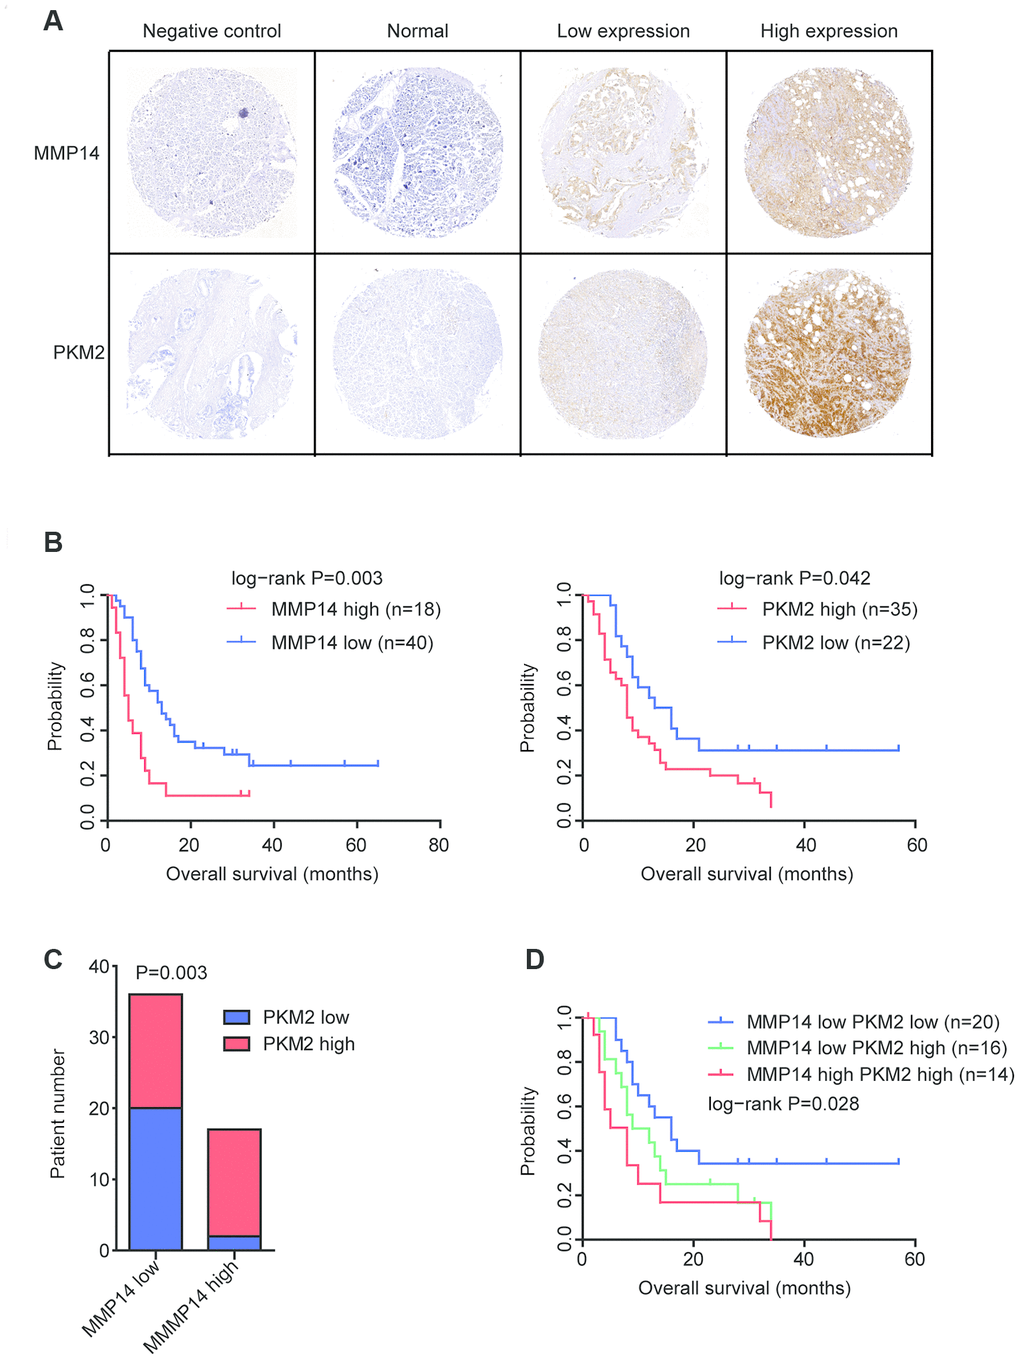 Validation of the expression and prognostic significance of MMP14 and PKM2 in pancreatic cancer by tissue microarray. (A) Representative photographs of immunohistochemical features of the stained sections of MMP14 and PKM2 in pancreatic cancer tissues and adjacent normal tissues. (B) Kaplan-Meier survival analysis was used to determine the different overall survival of pancreatic cancer patients with highly stained MMP14 or PKM2 (red) and pancreatic cancer patients with low stained MMP14 or PKM2 (blue). P values were generated from Log-rank test. (C) Contingency graphs showed the number of pancreatic cancer patients with both high MMP14 and PKM2 expression. P values were determined by Chi-square test. (D) Kaplan-Meier plotters demonstrated the different overall survival of pancreatic cancer patients with different expression levels of MMP14 and PKM2.